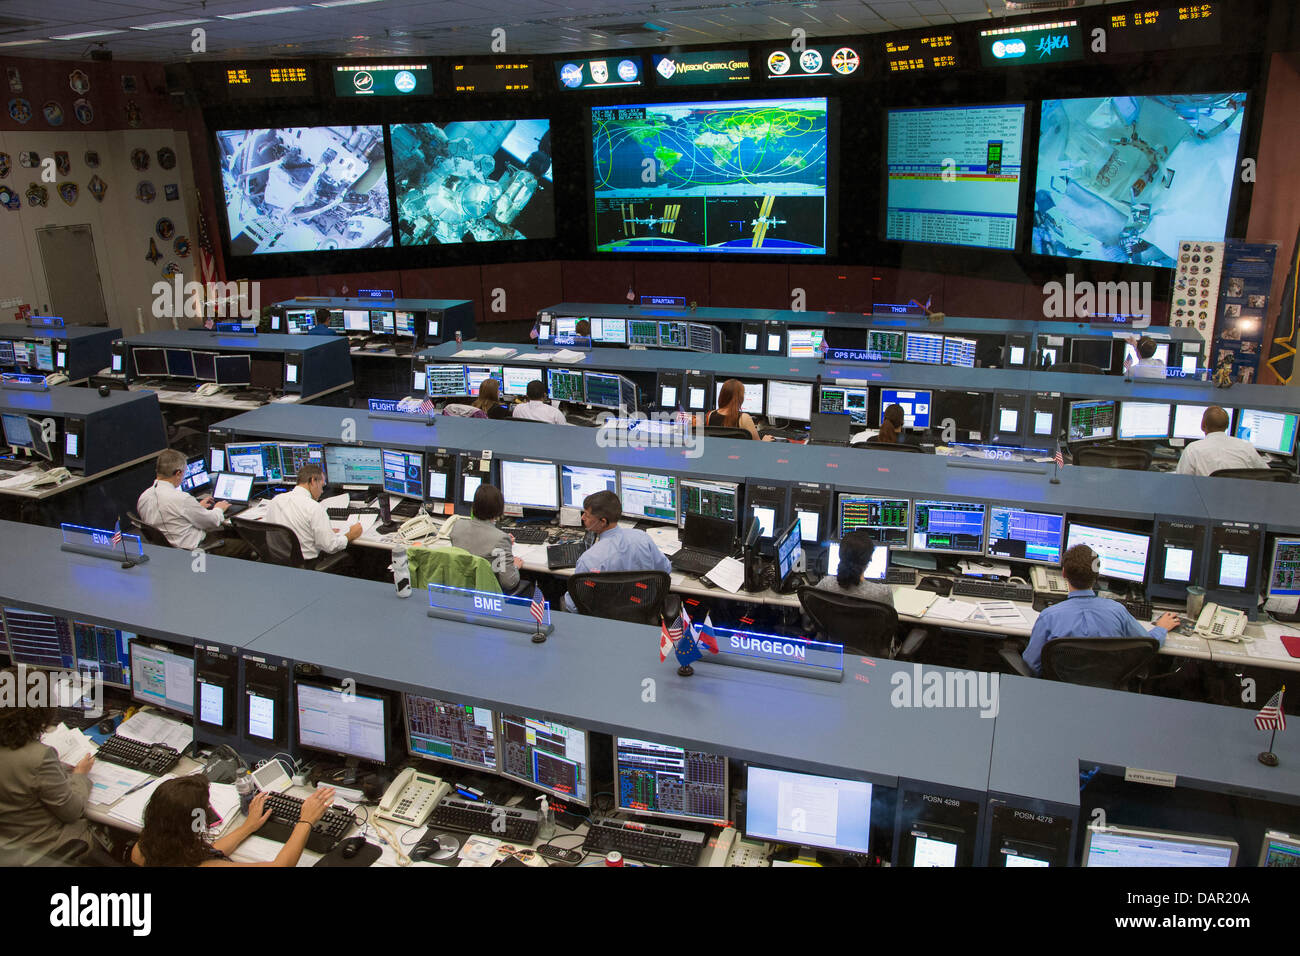 An overall view of the space station flight control room